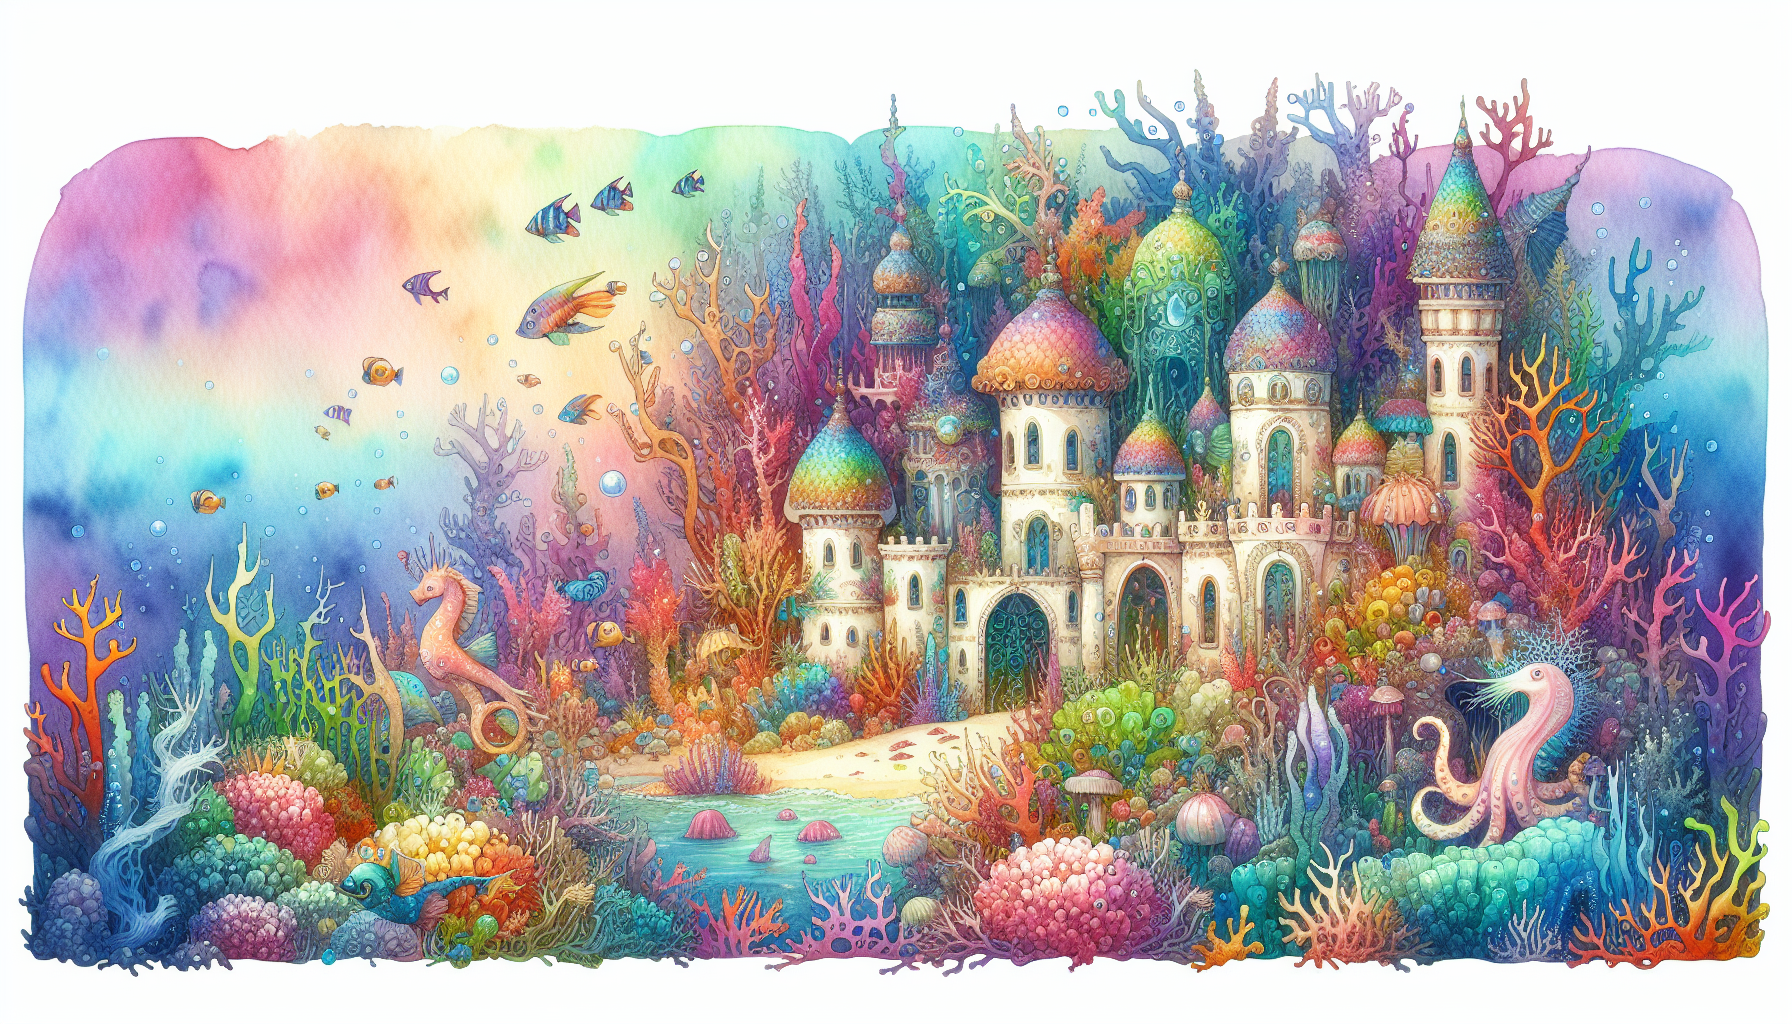 The Coral Kingdom Guardians of the Underwater Realm